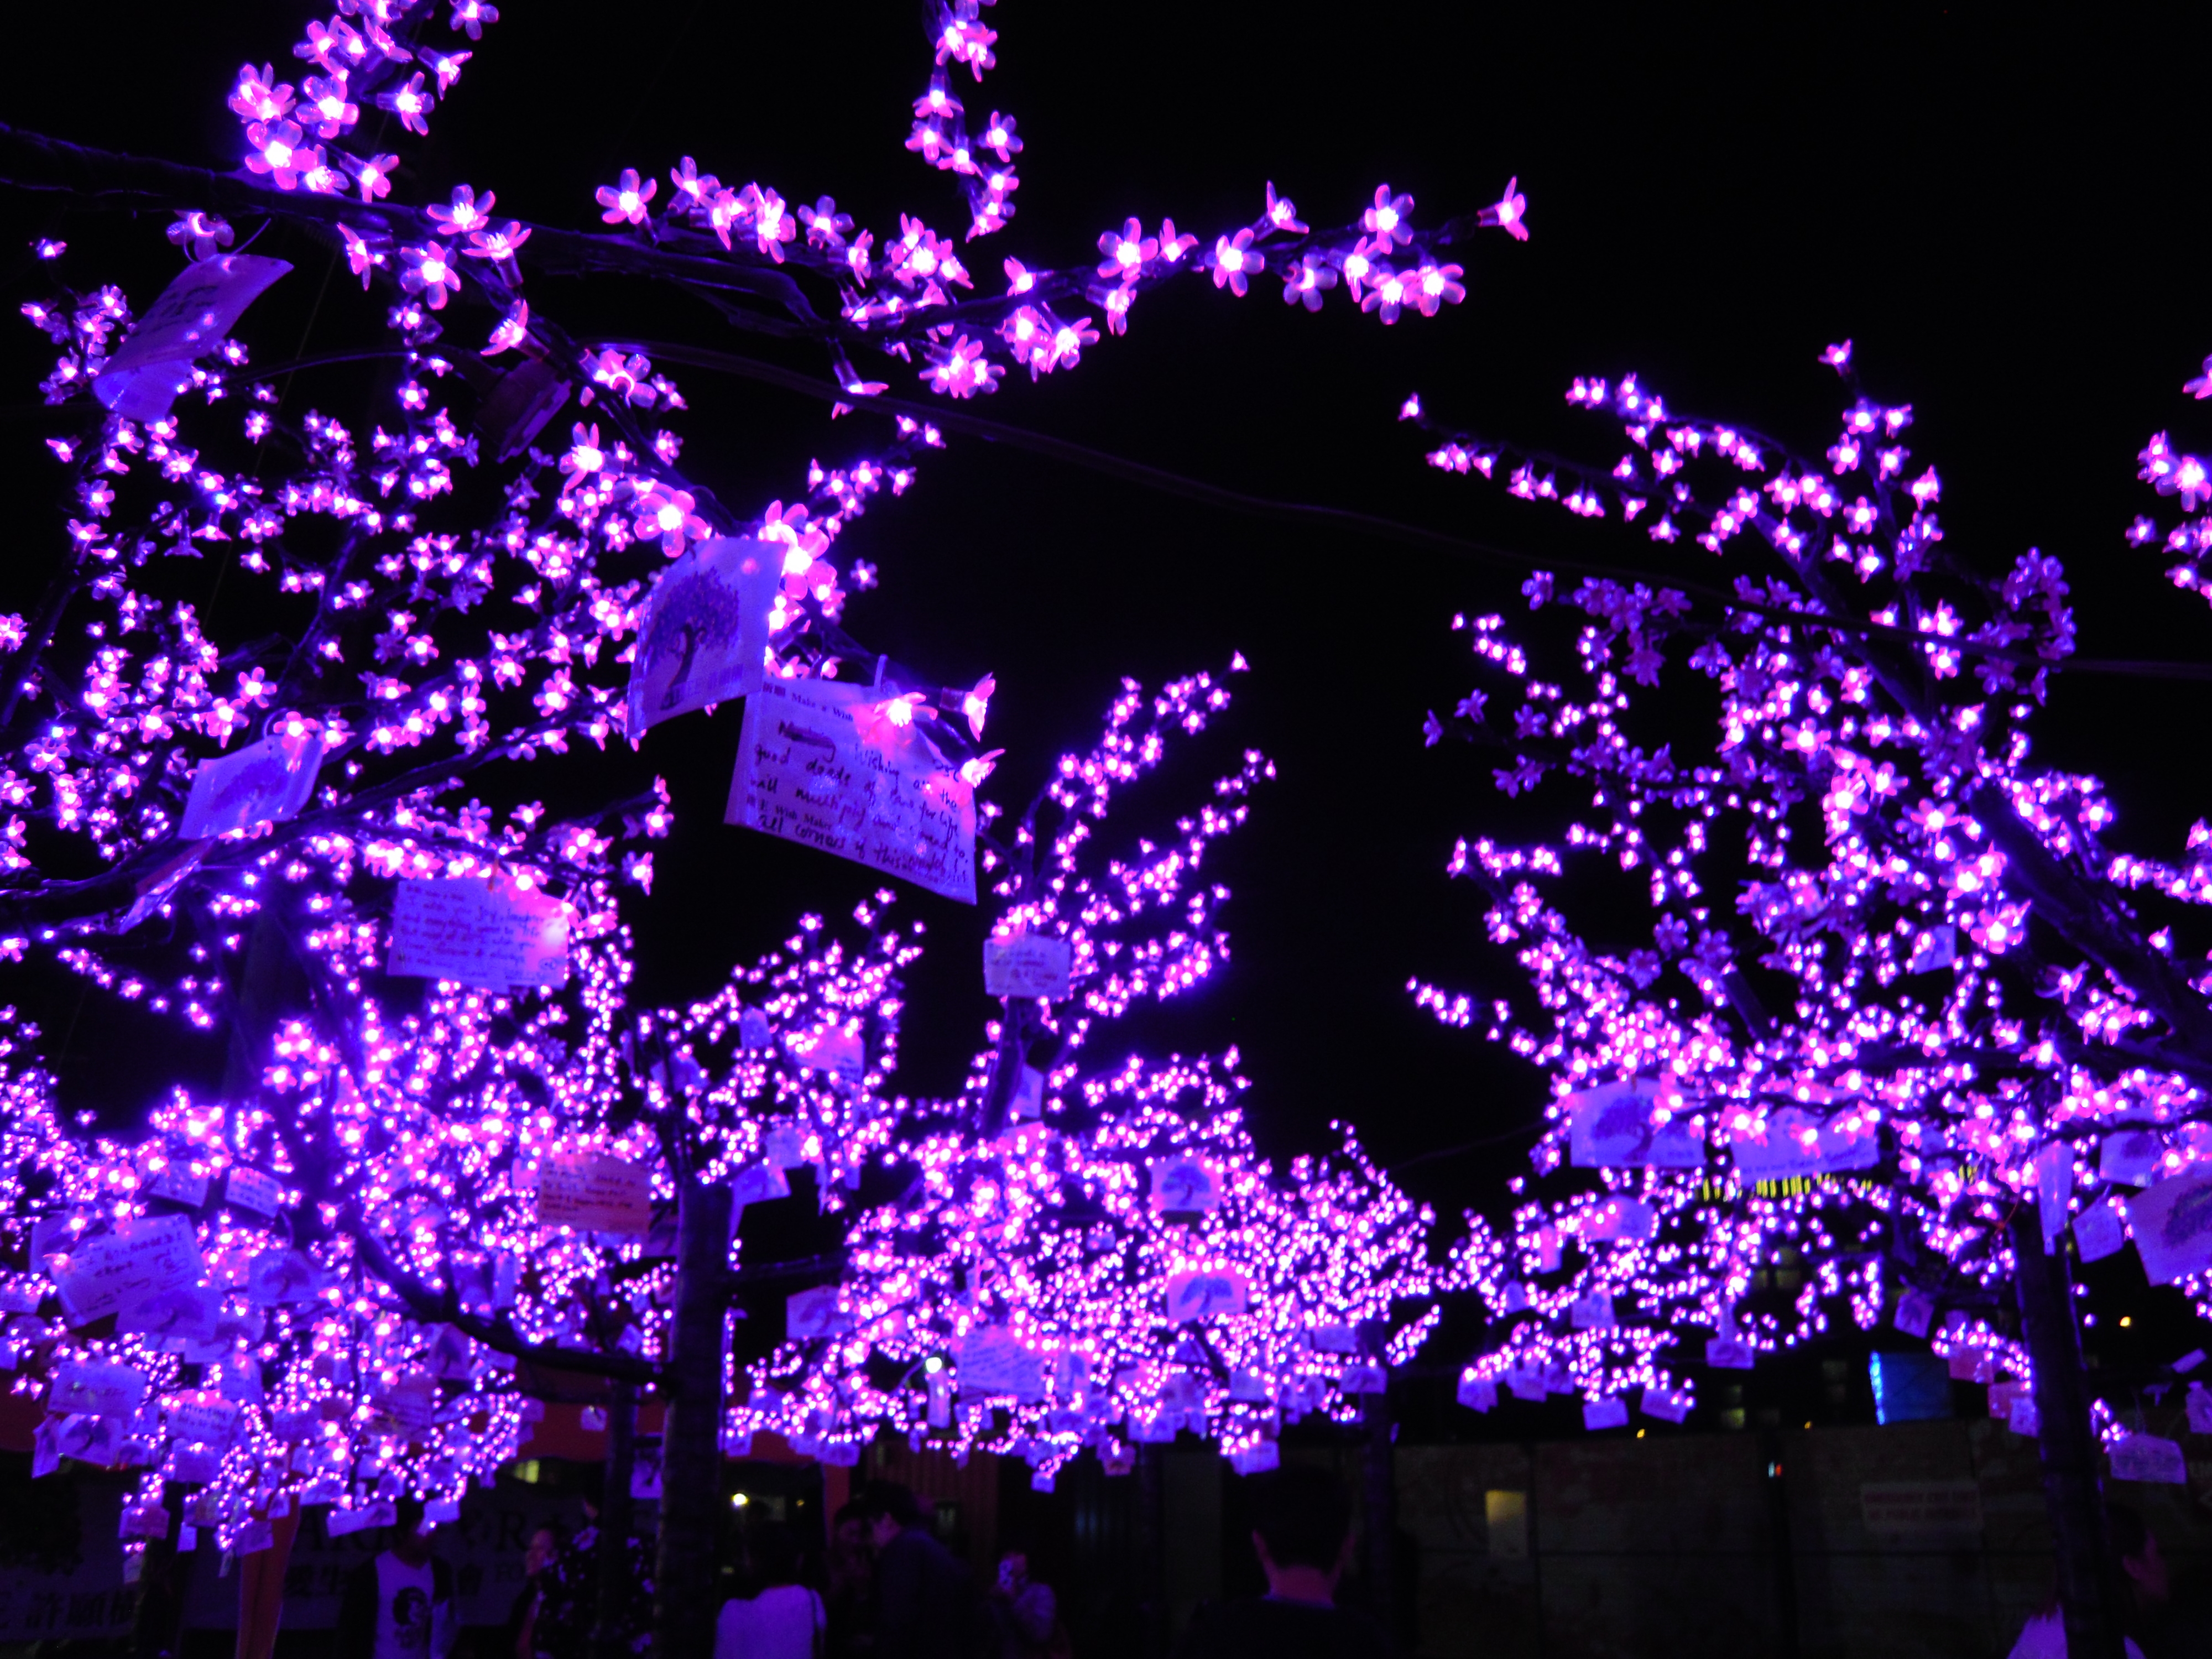 Purple Lights On Trees At Richmond Night Market | Free Images at Clker